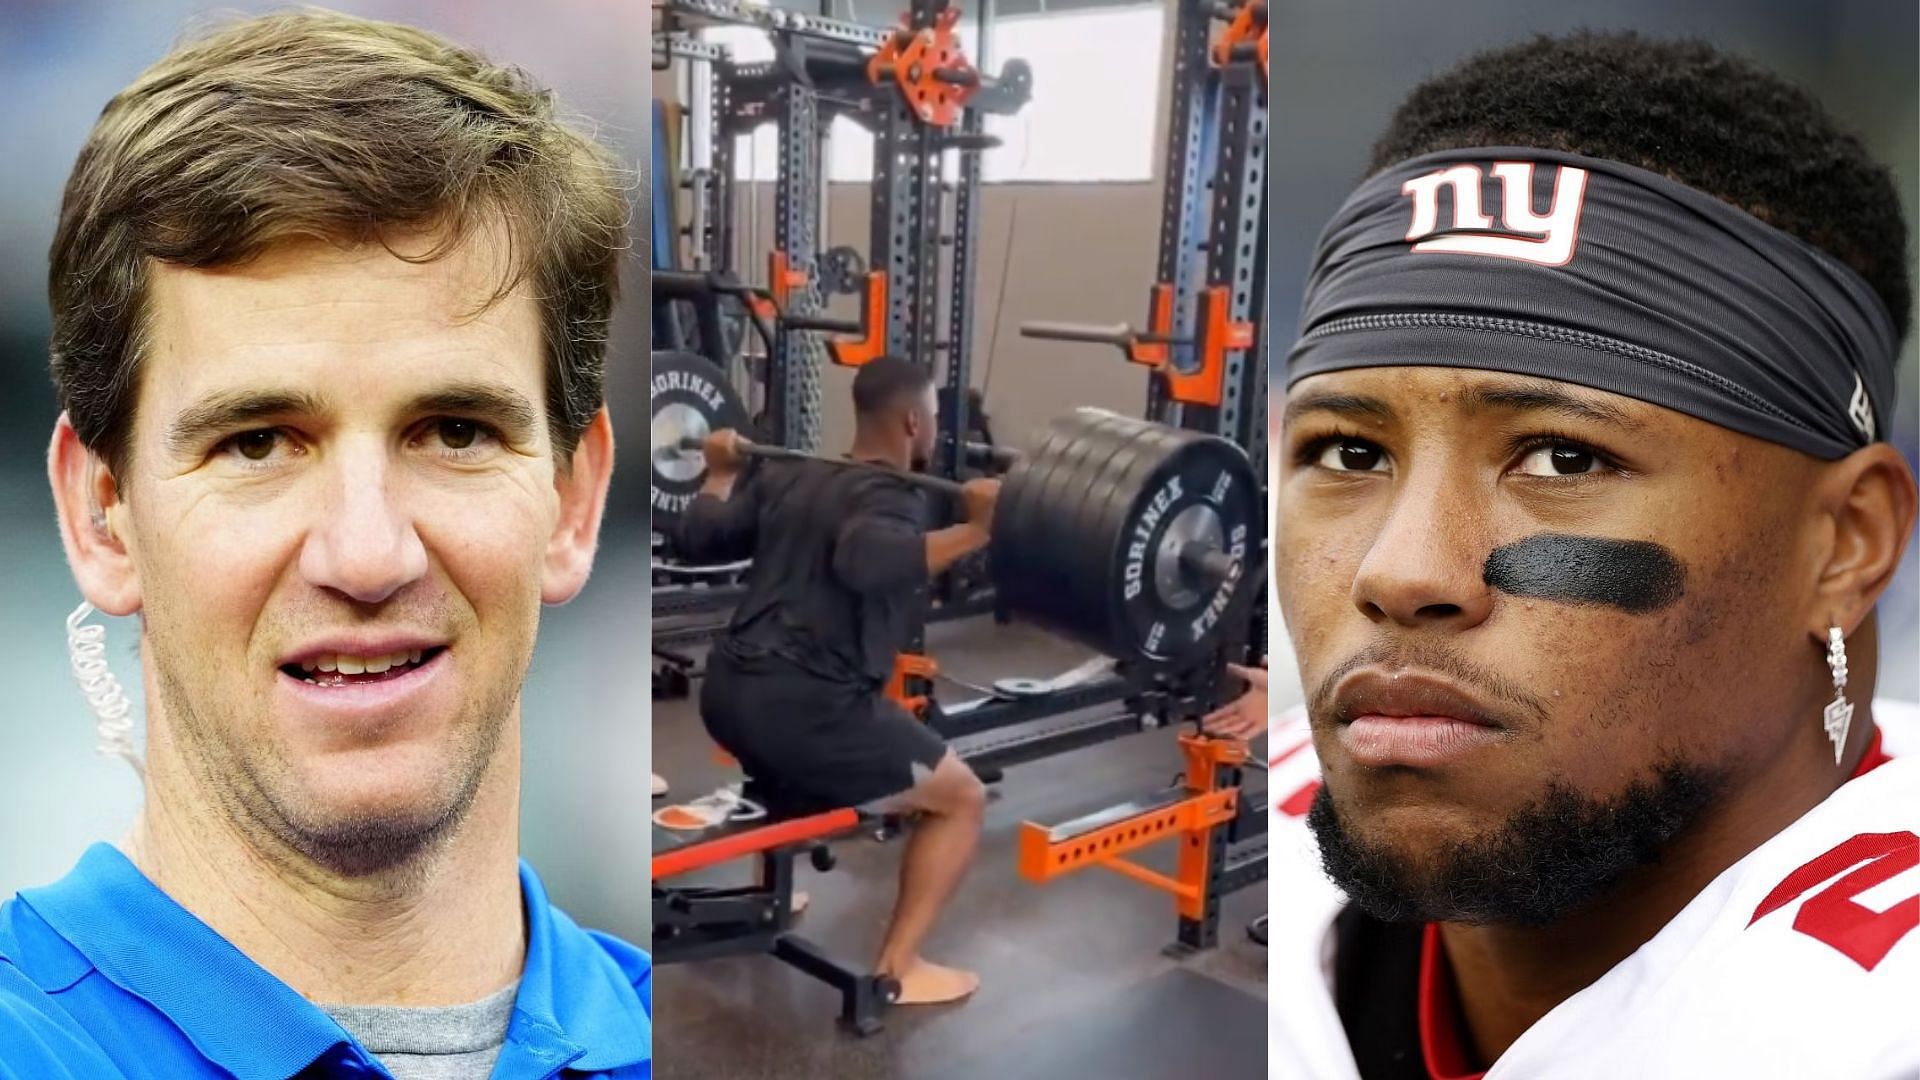 Former NFL quarterback Eli Manning joked that he can do the same 585-pound squat that New York Giants running back Saquon Barkley pulled off. (Image credit: Saquon Barkley/Twitter)